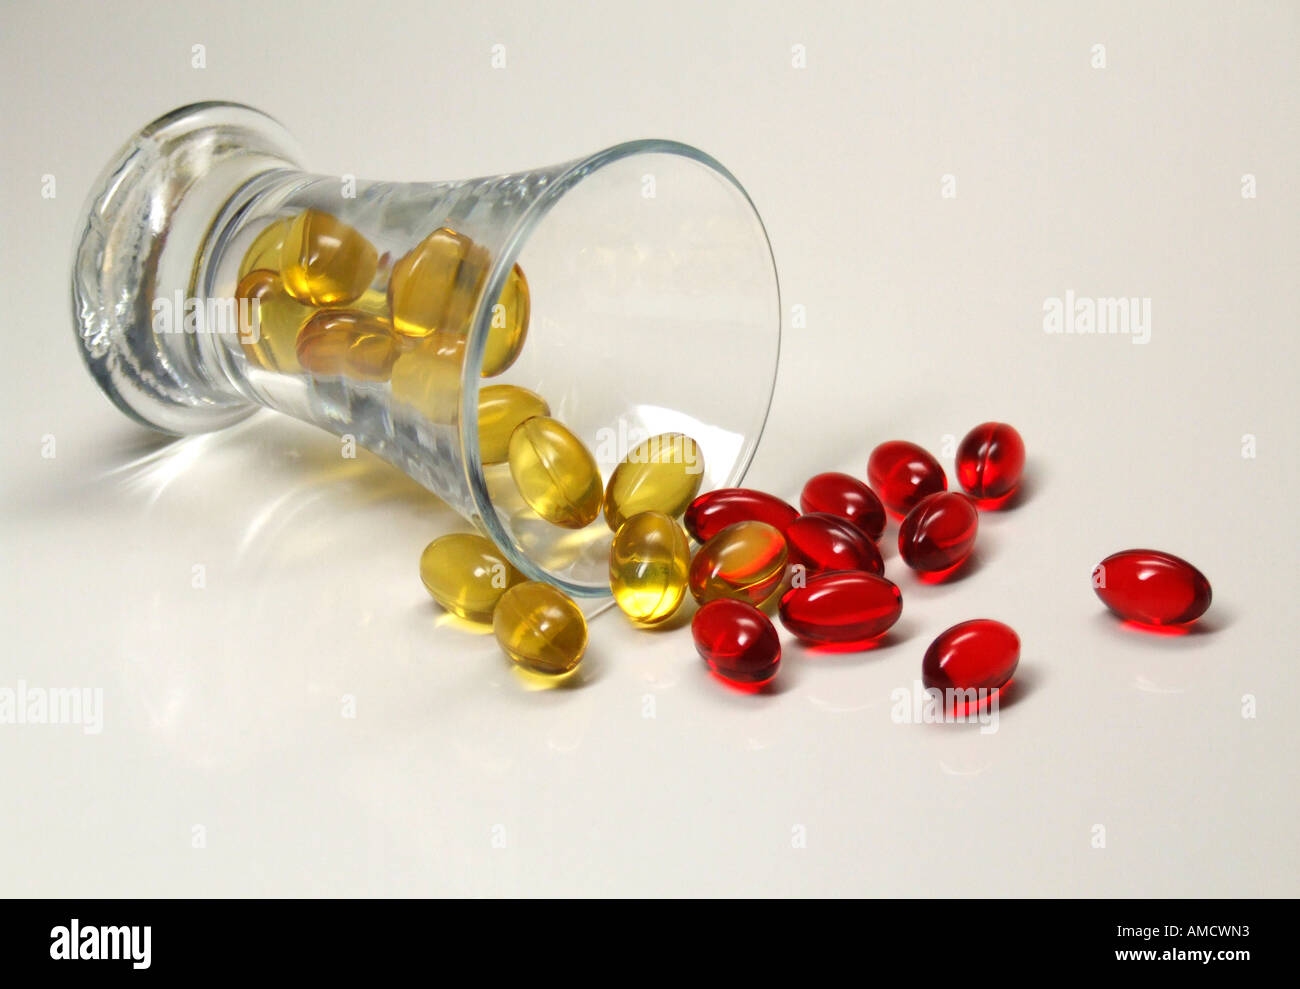 Oil capsule in glass elevated view Stock Photo